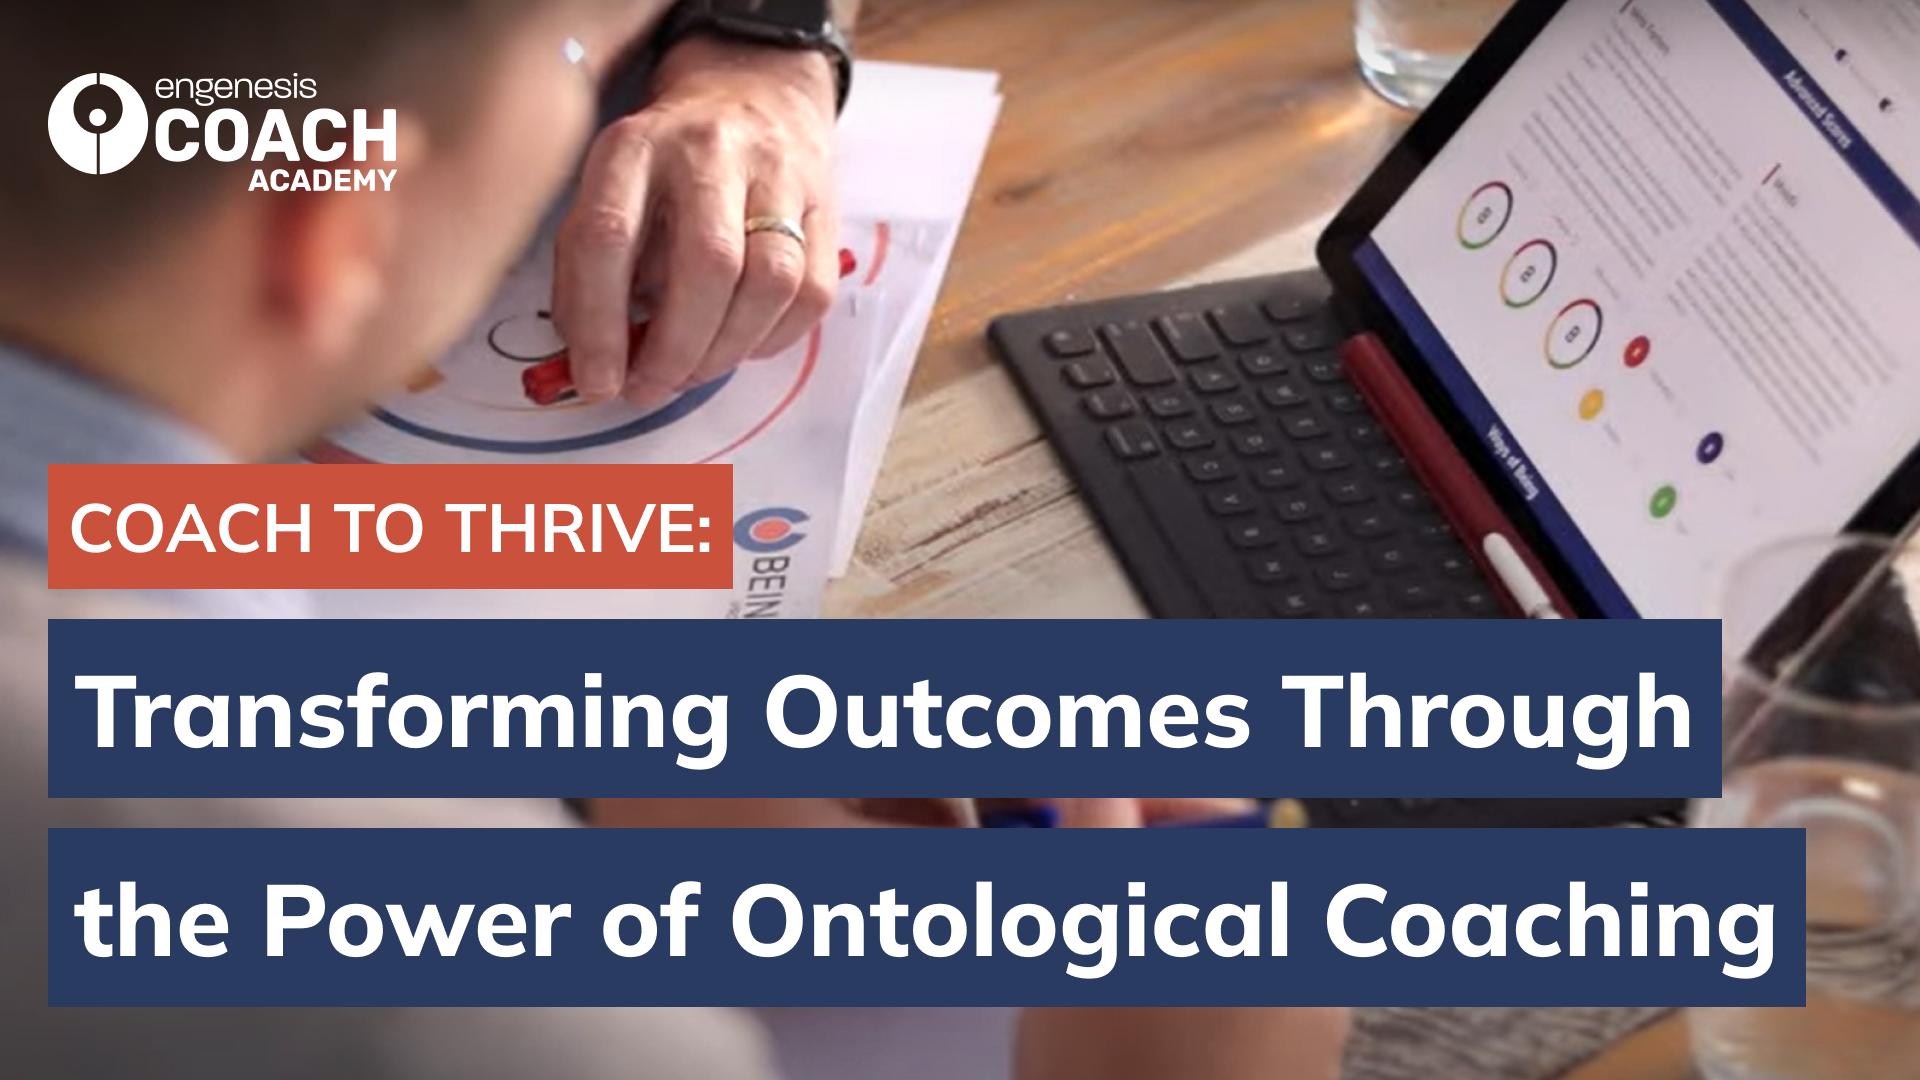 Coach to THRIVE: Transforming Outcomes Through the Power of Ontological Coaching